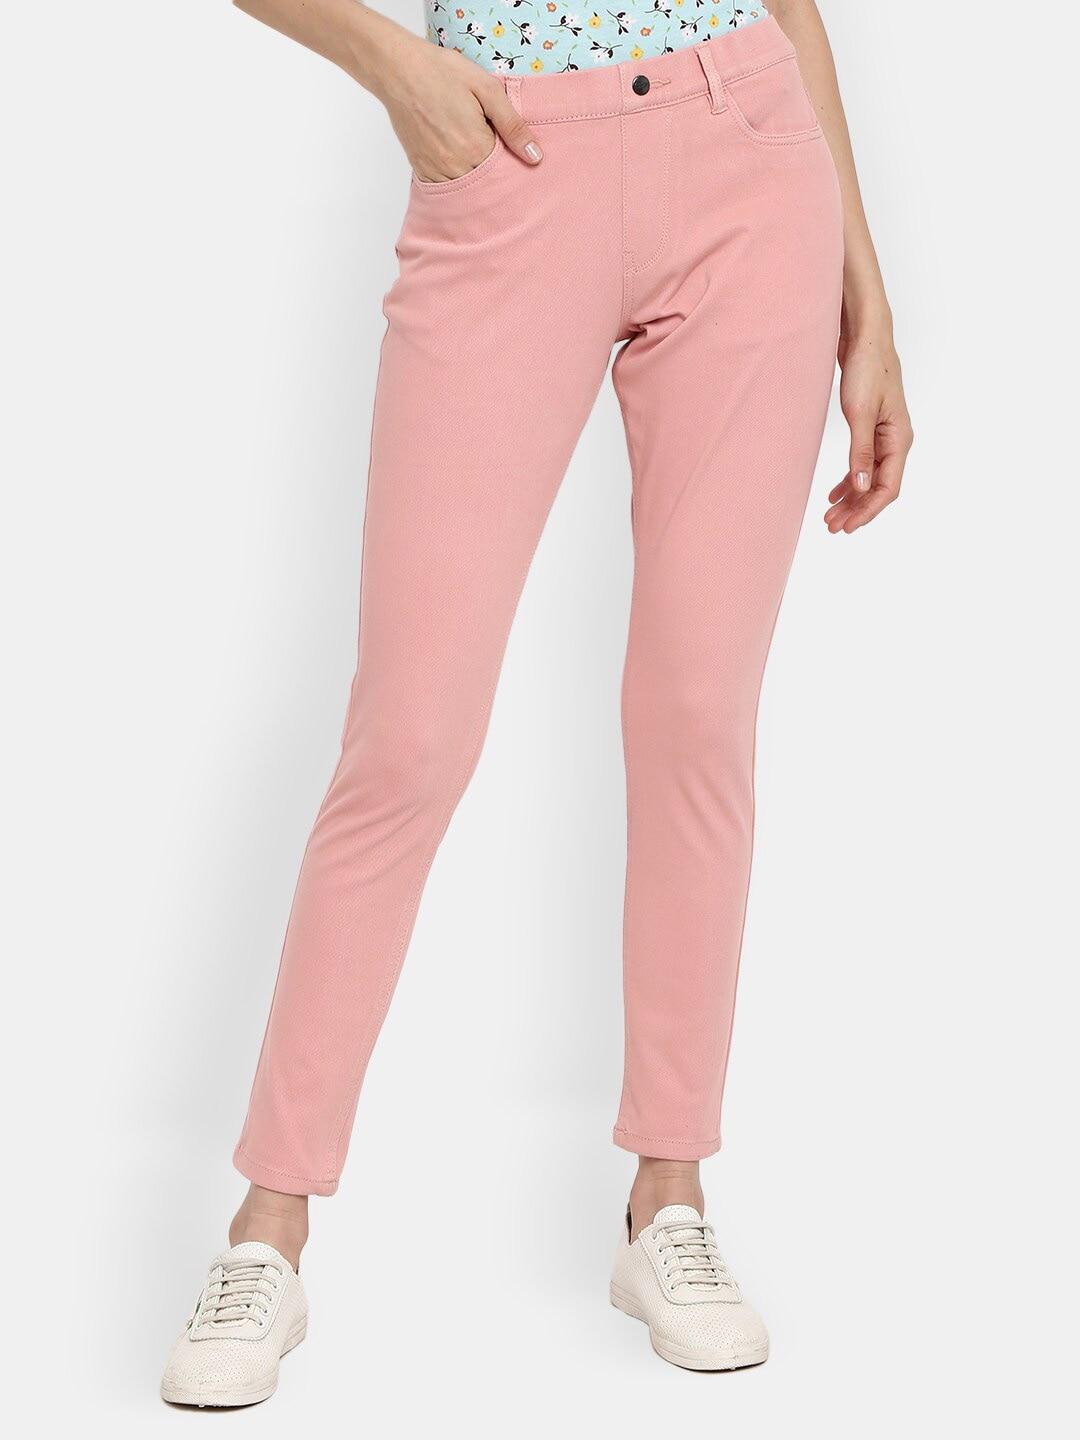 v-mart women peach-colored solid cotton jeggings